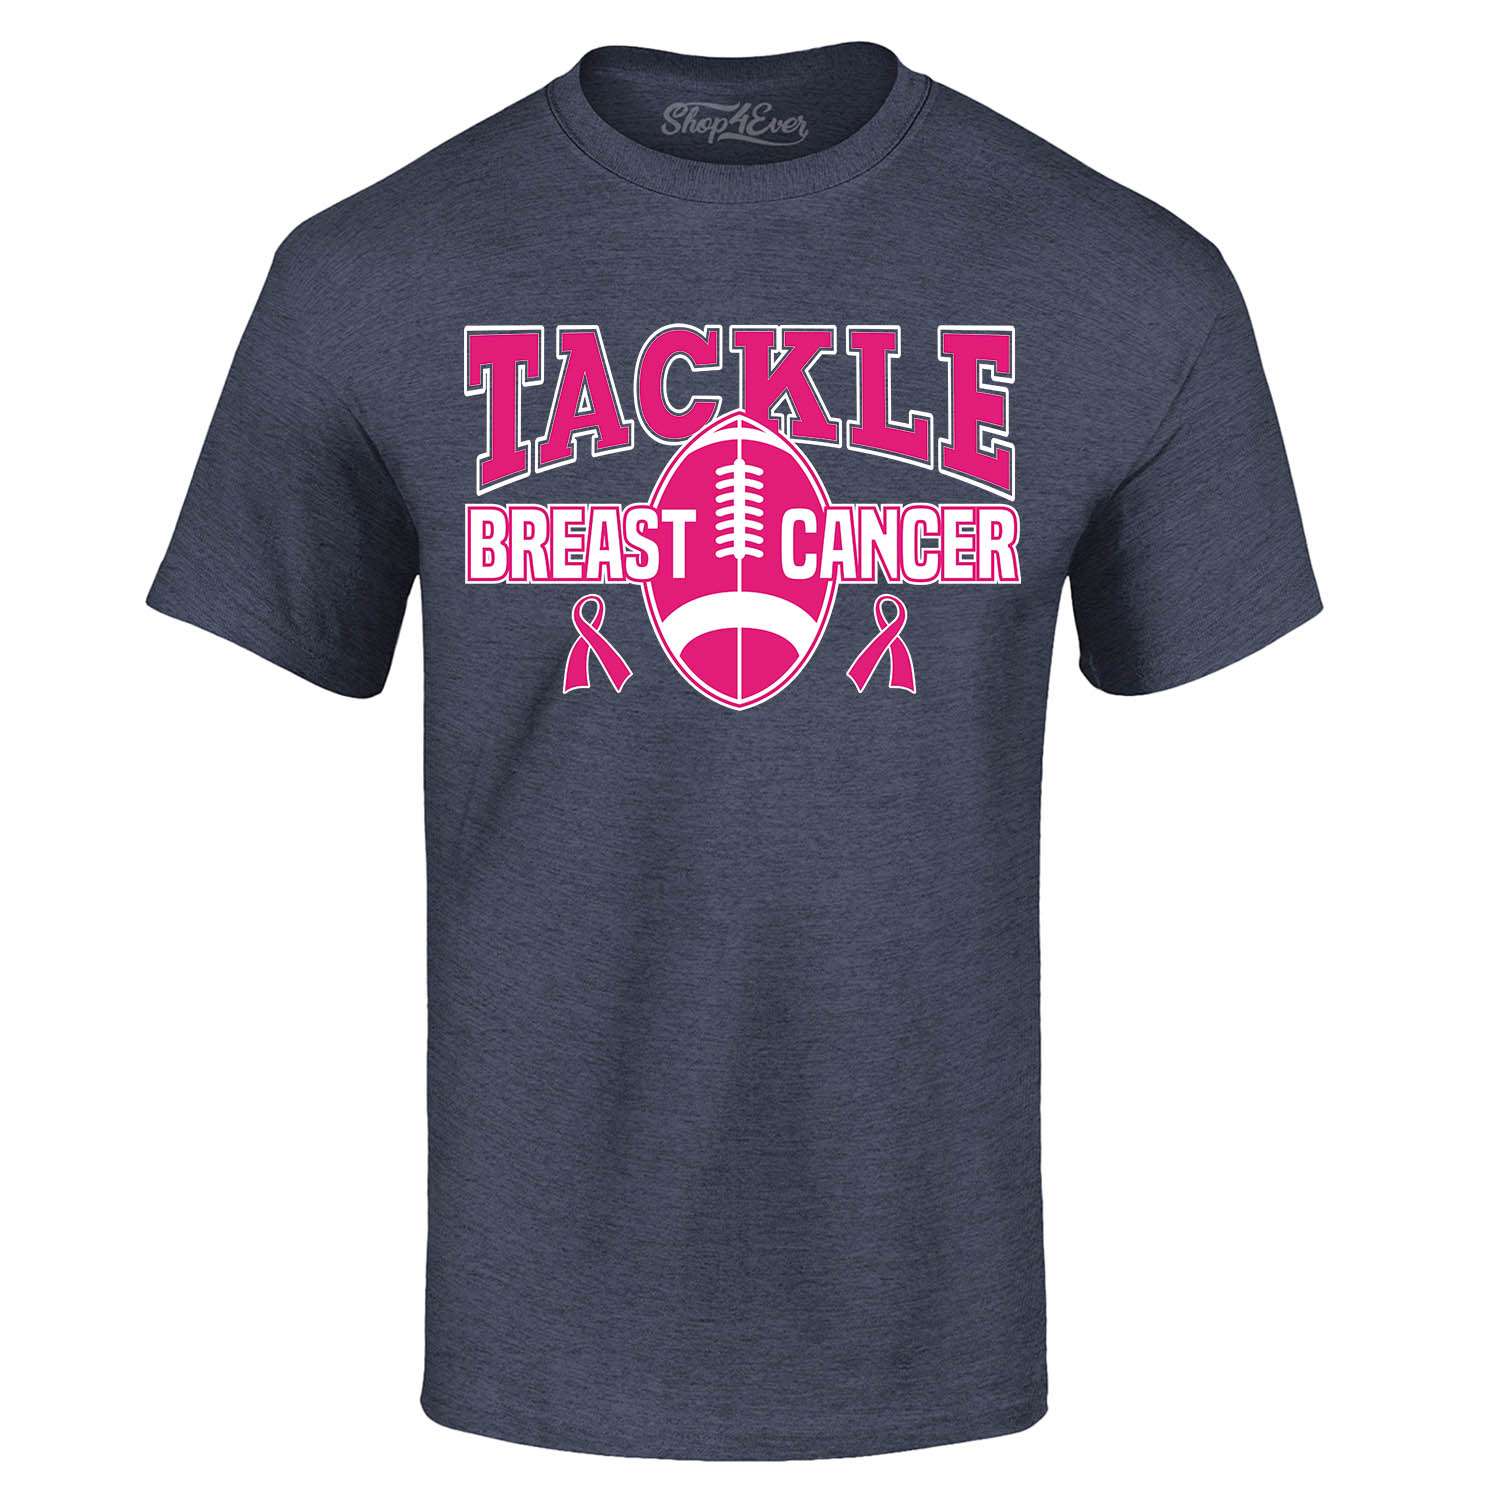 Tackle Breast Cancer T-shirt Pink Ribbon Support Fight Faith Awareness Shirts